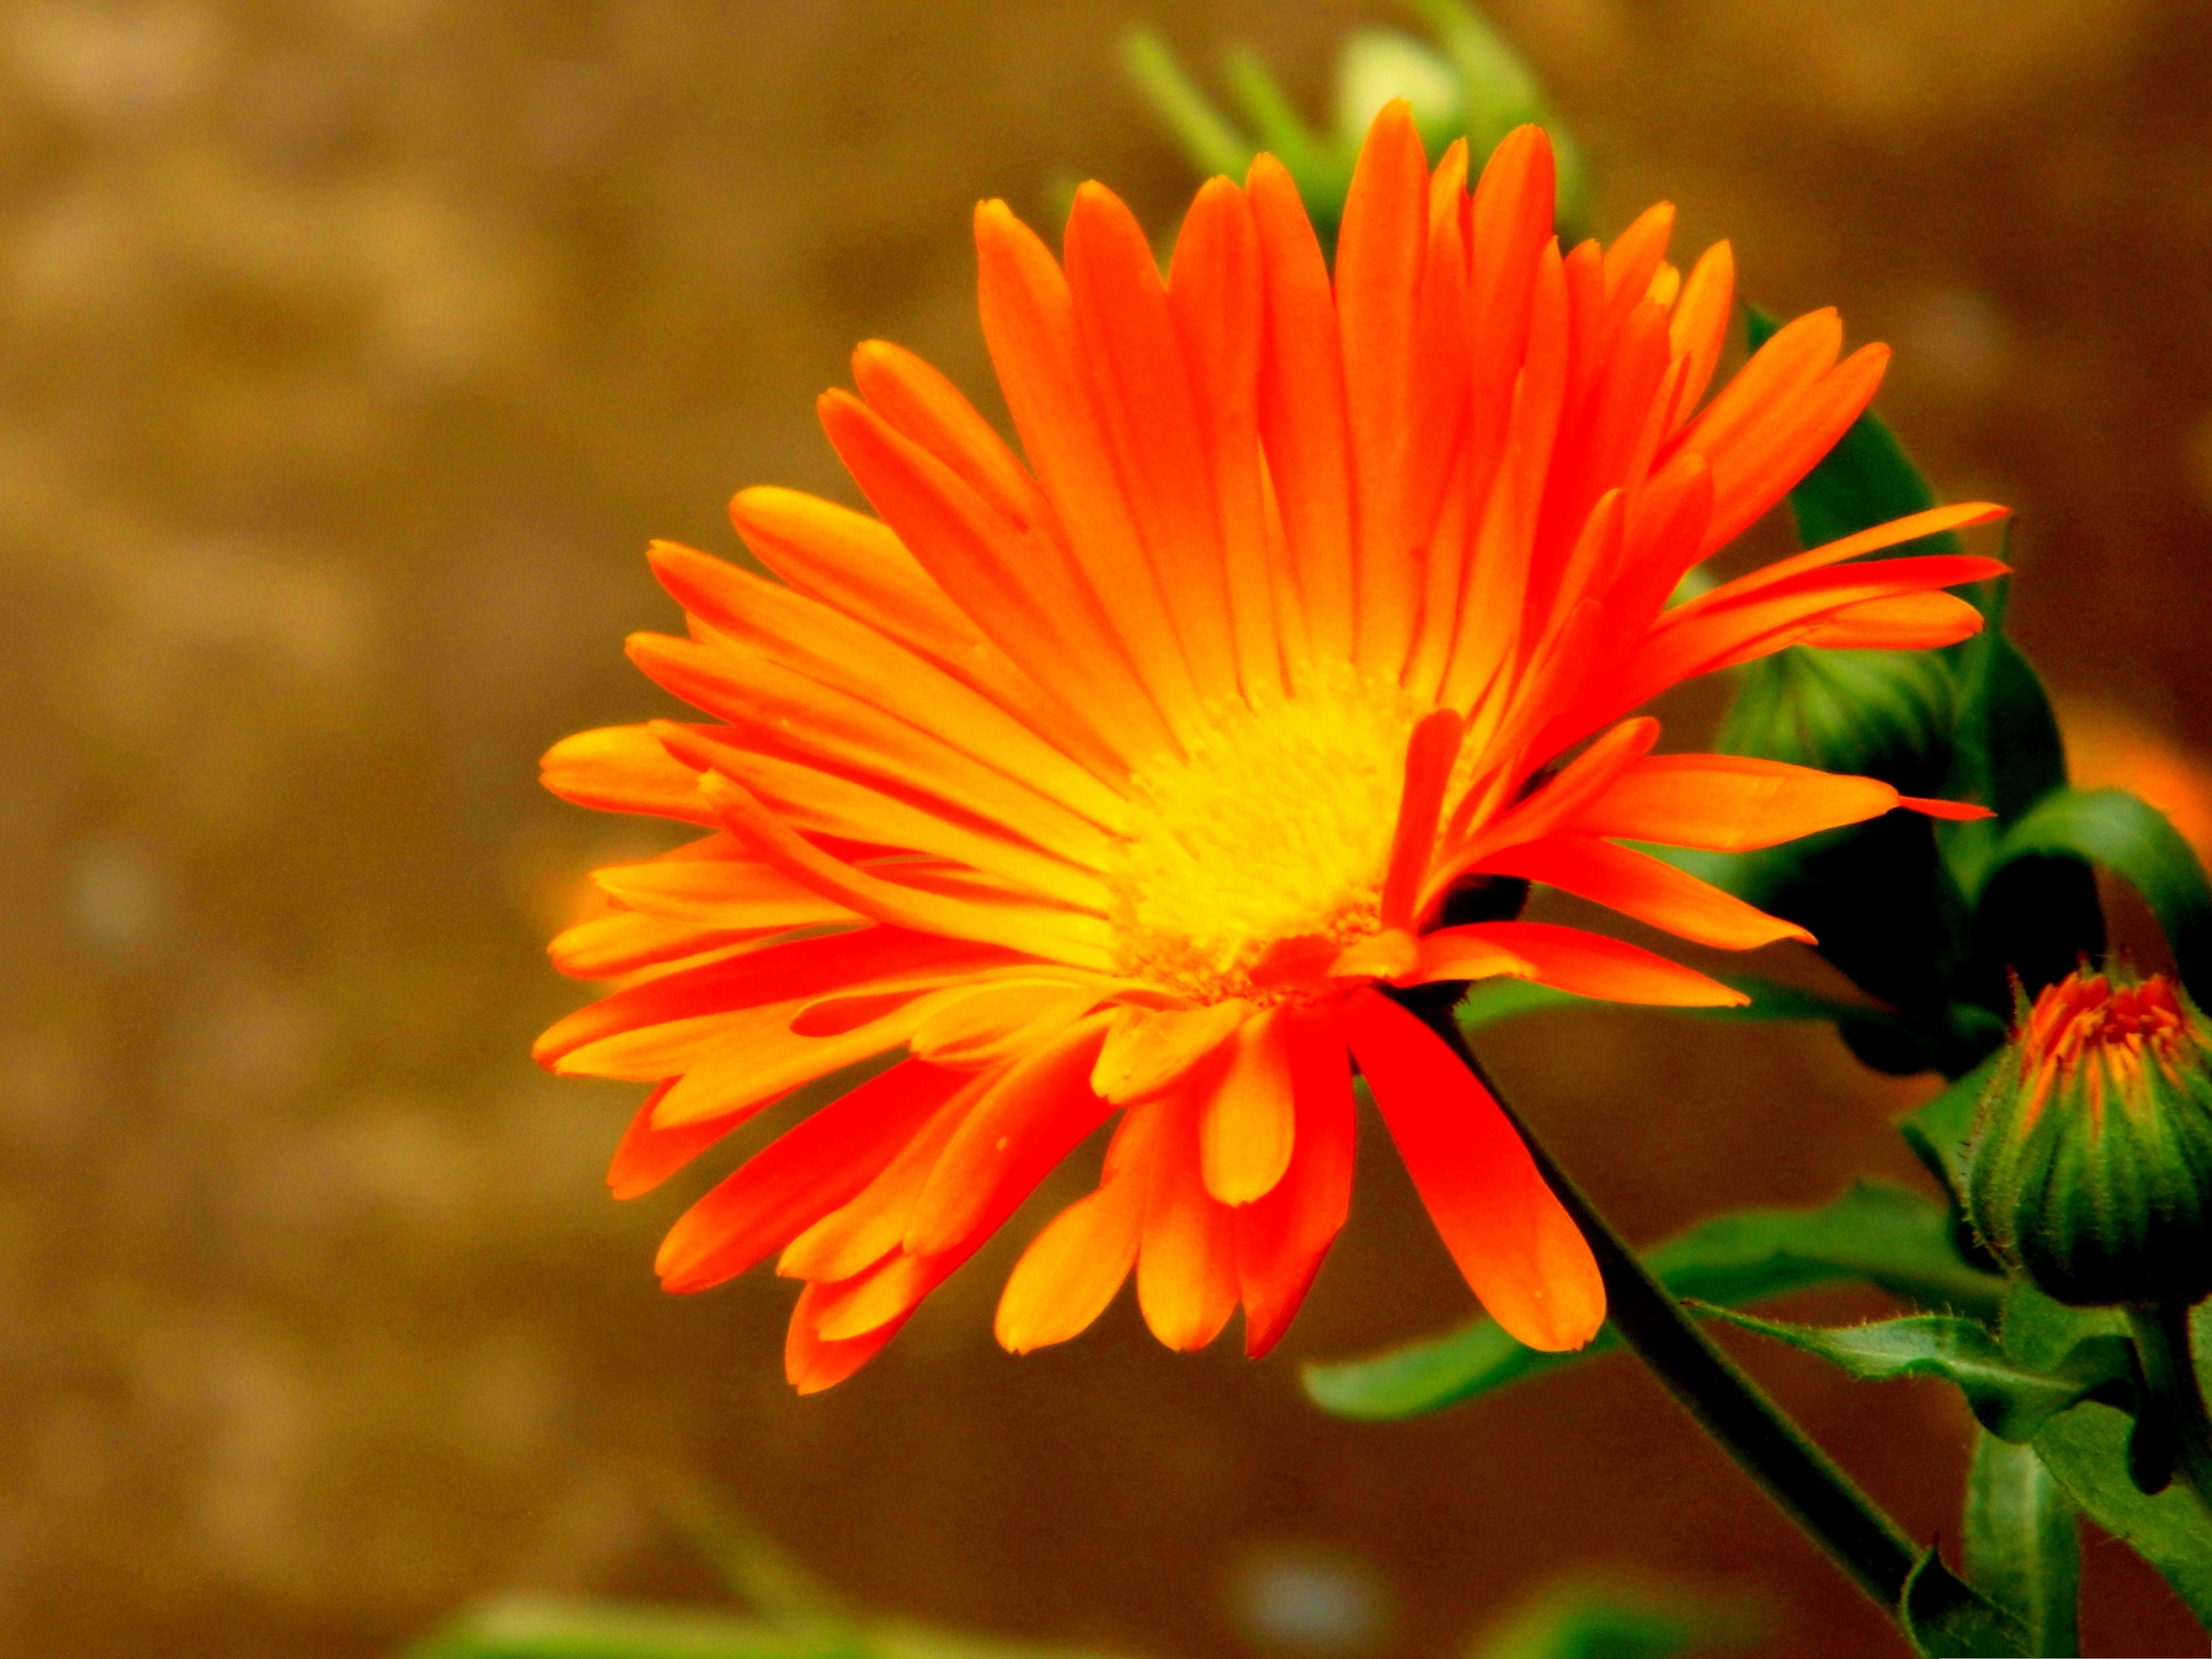 Orange Flower Picture, Bright-Colored Flower in Bloom ...